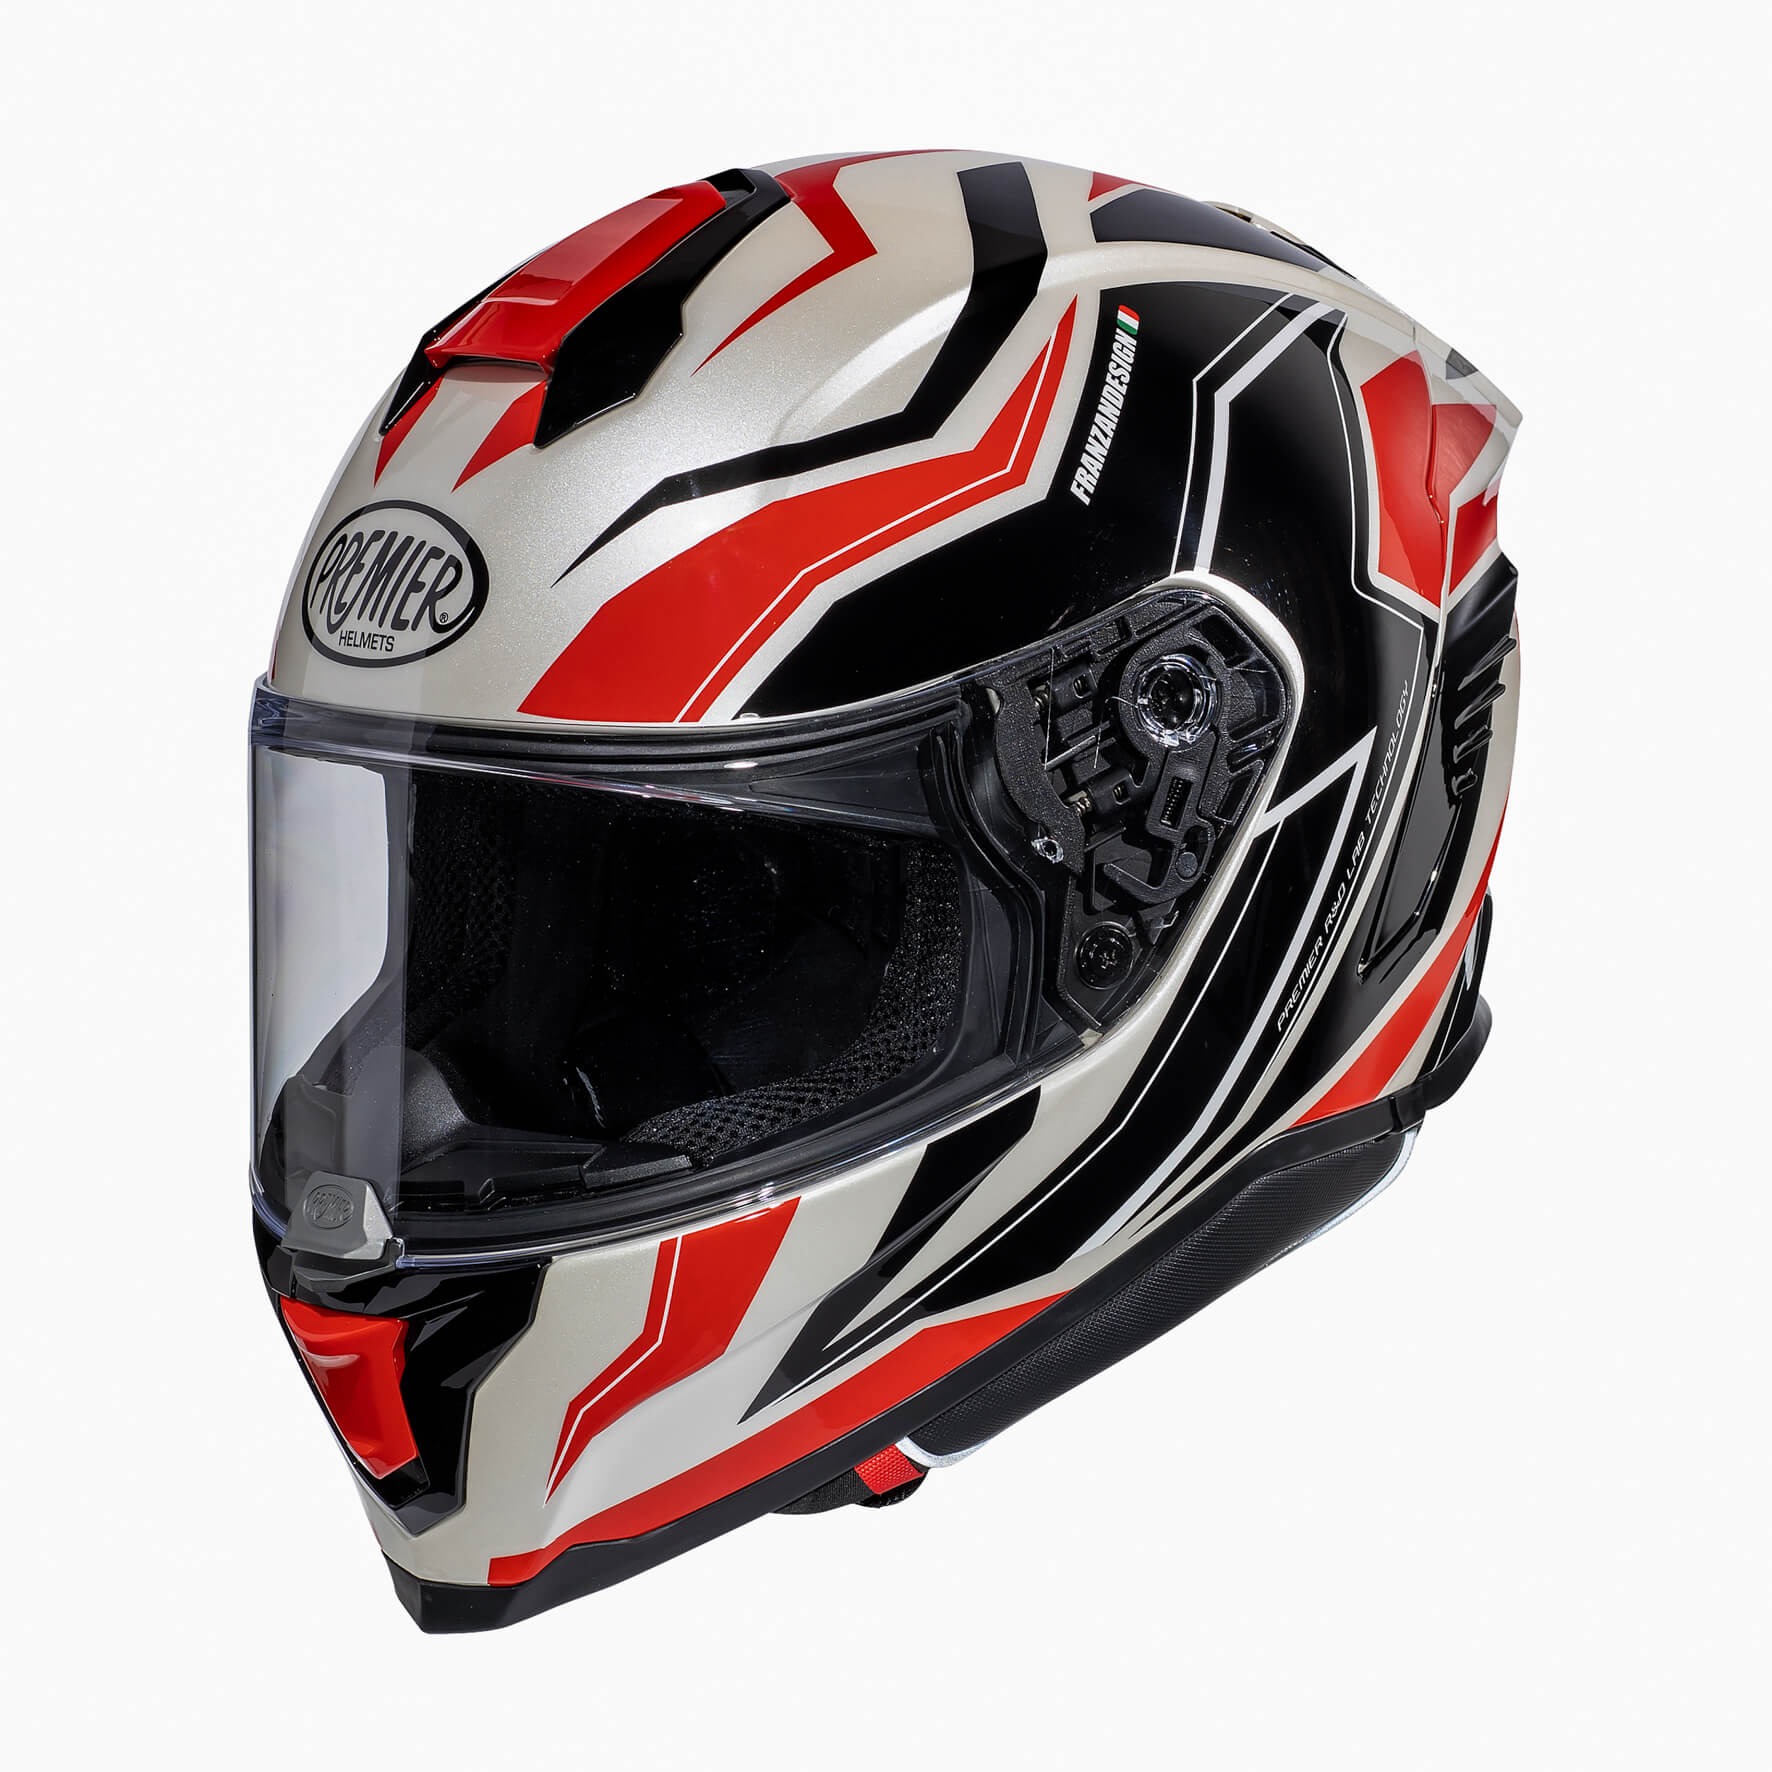 Image of Premier Hyper RW 2 Casque Intégral Taille S